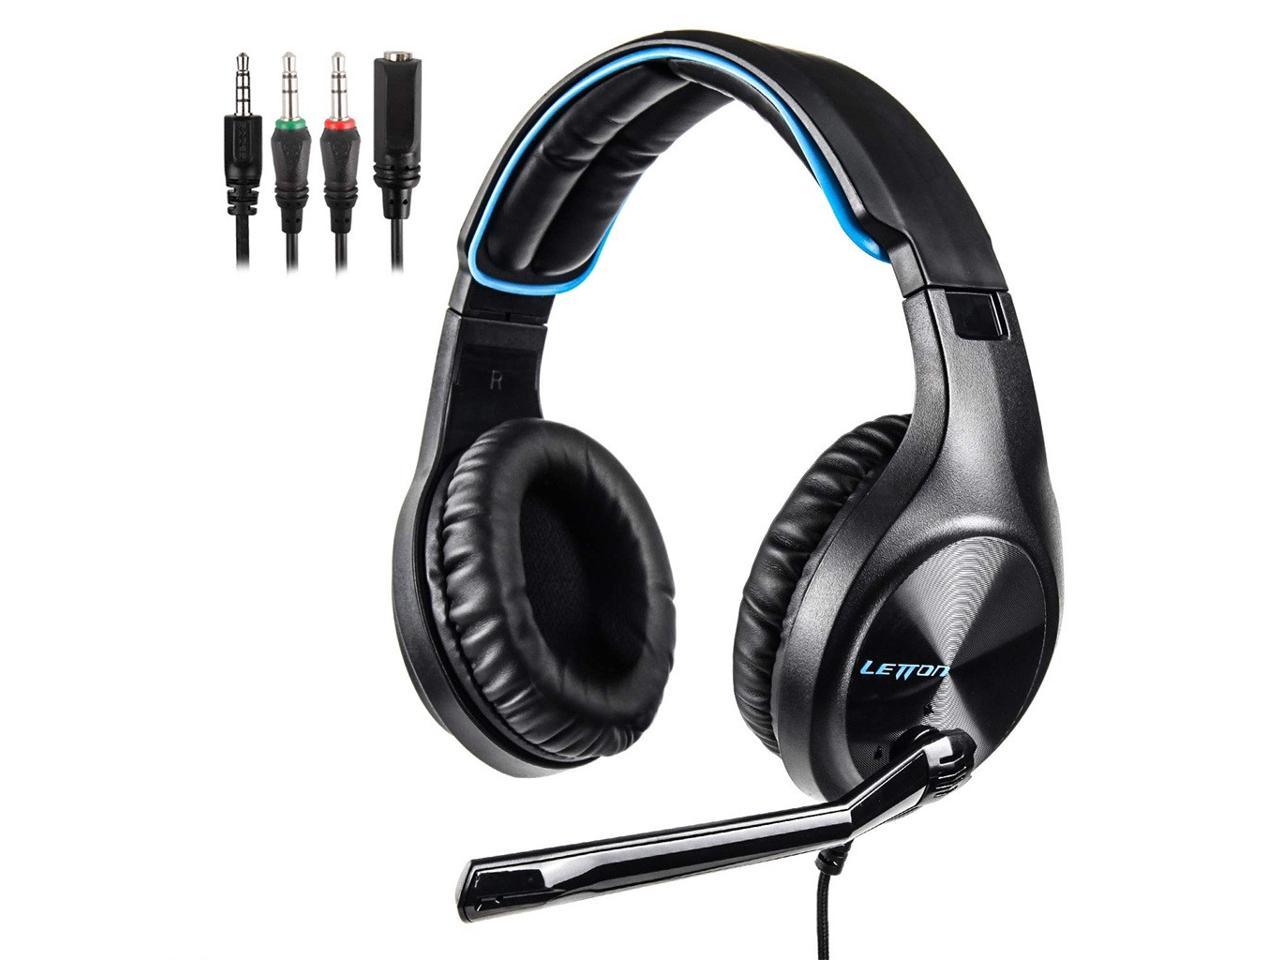 Letton L6 Gaming Headset Wired PC Stereo Earphones Headphones with Microphone for Computer Gamer headphone